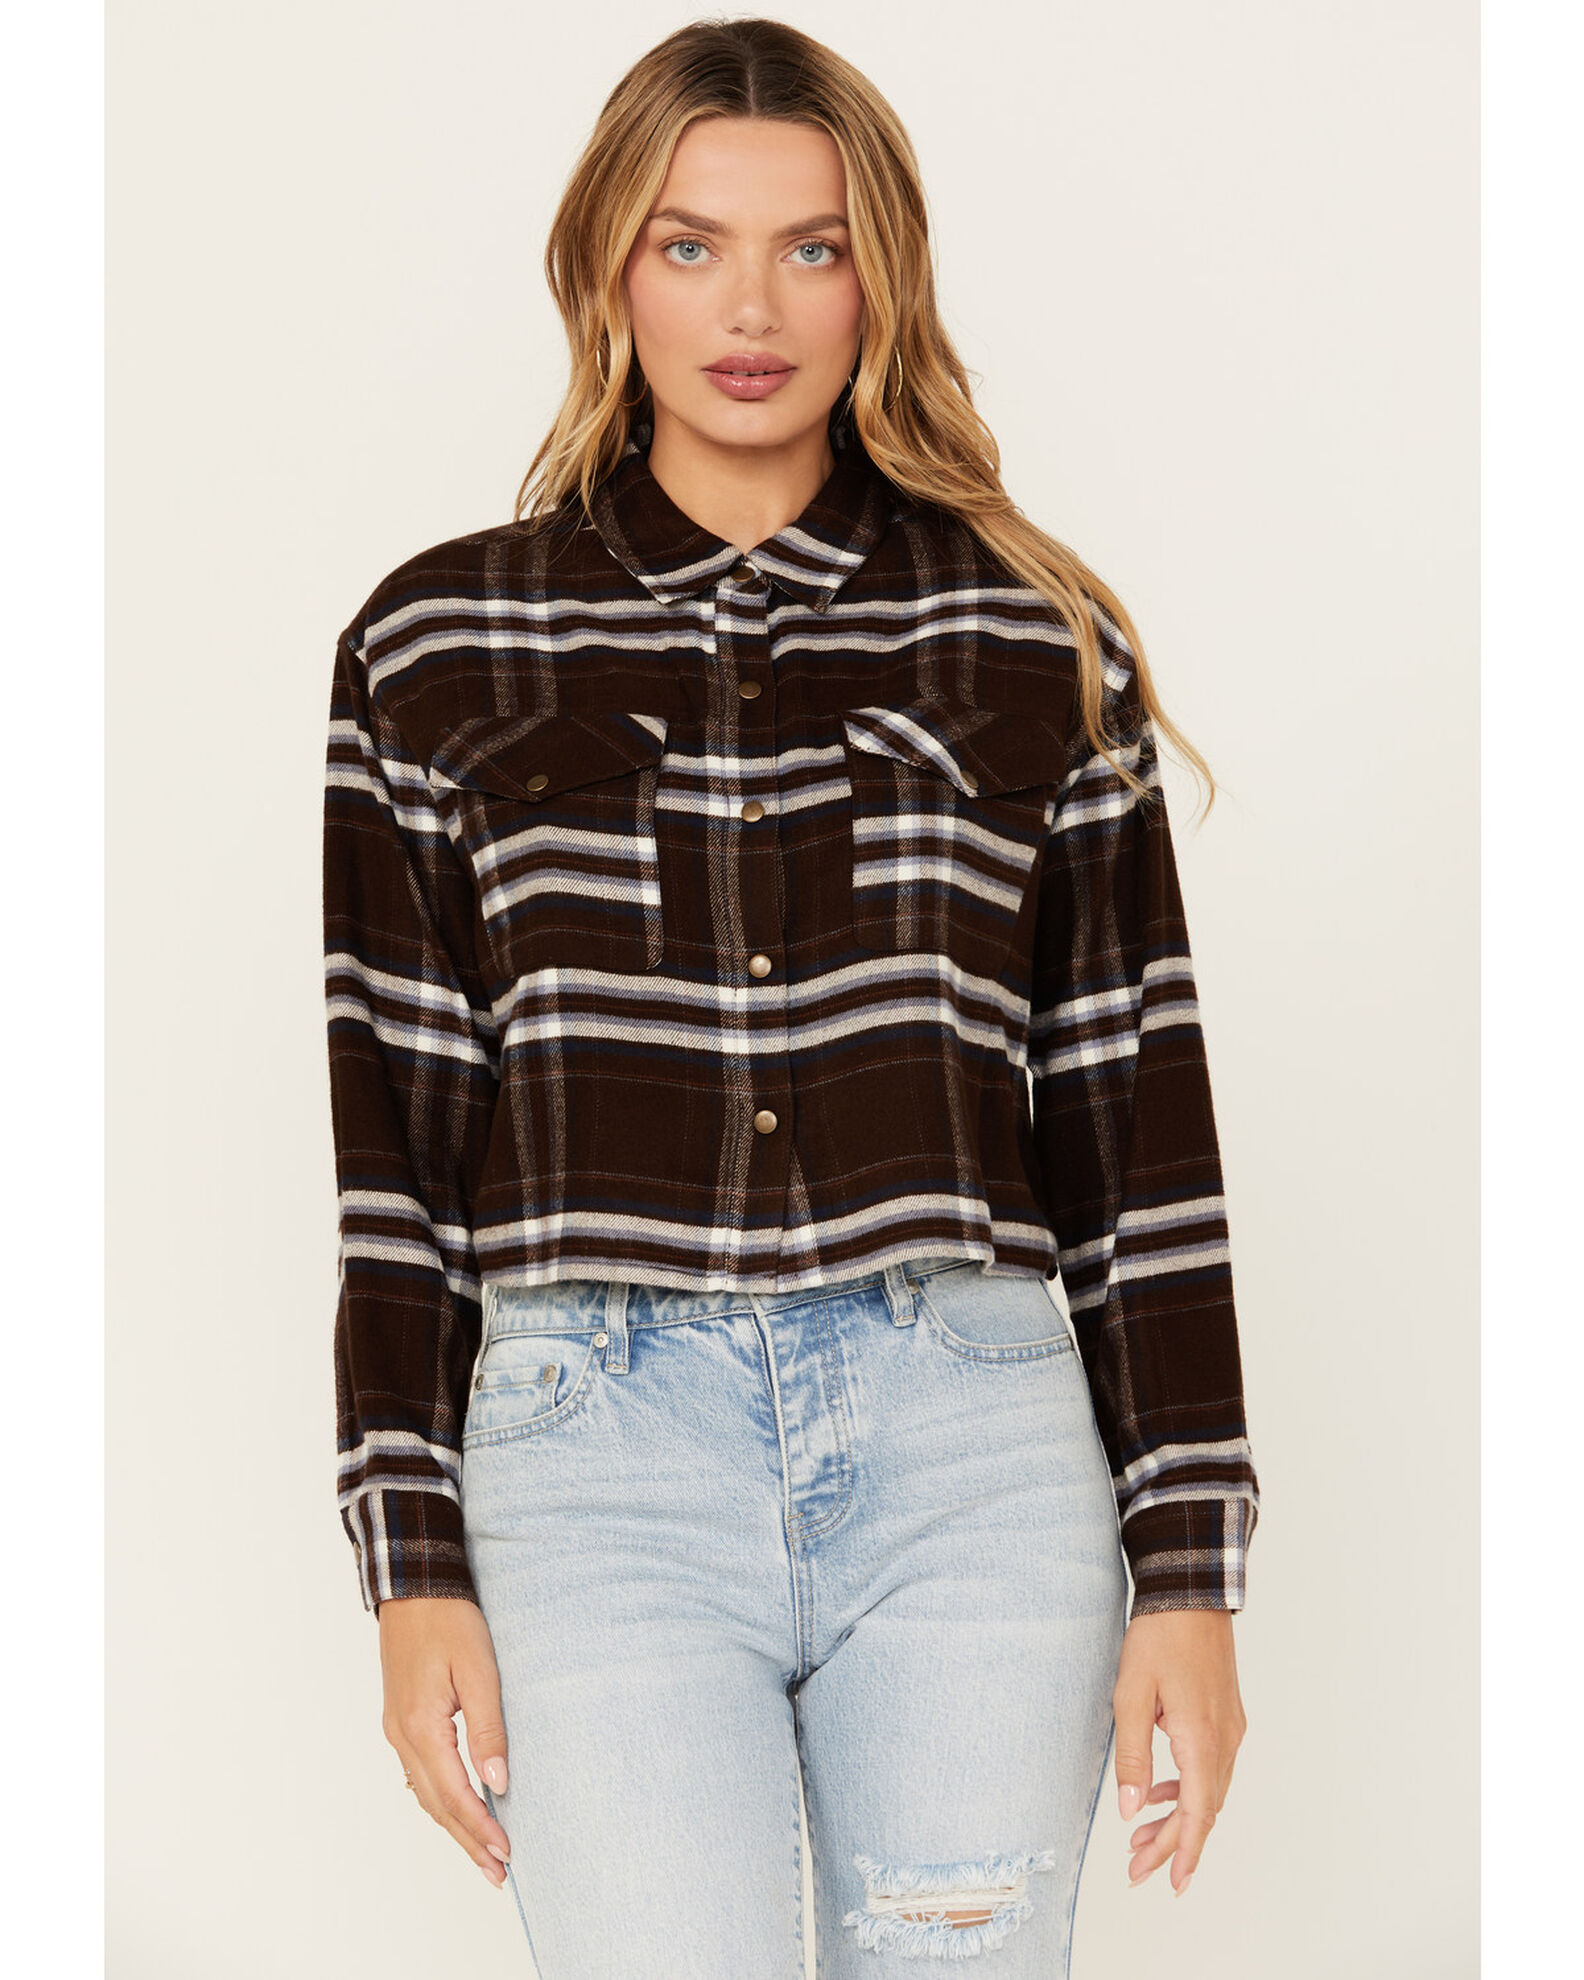 Cleo + Wolf Women's Cropped Plaid Print Flannel Shirt